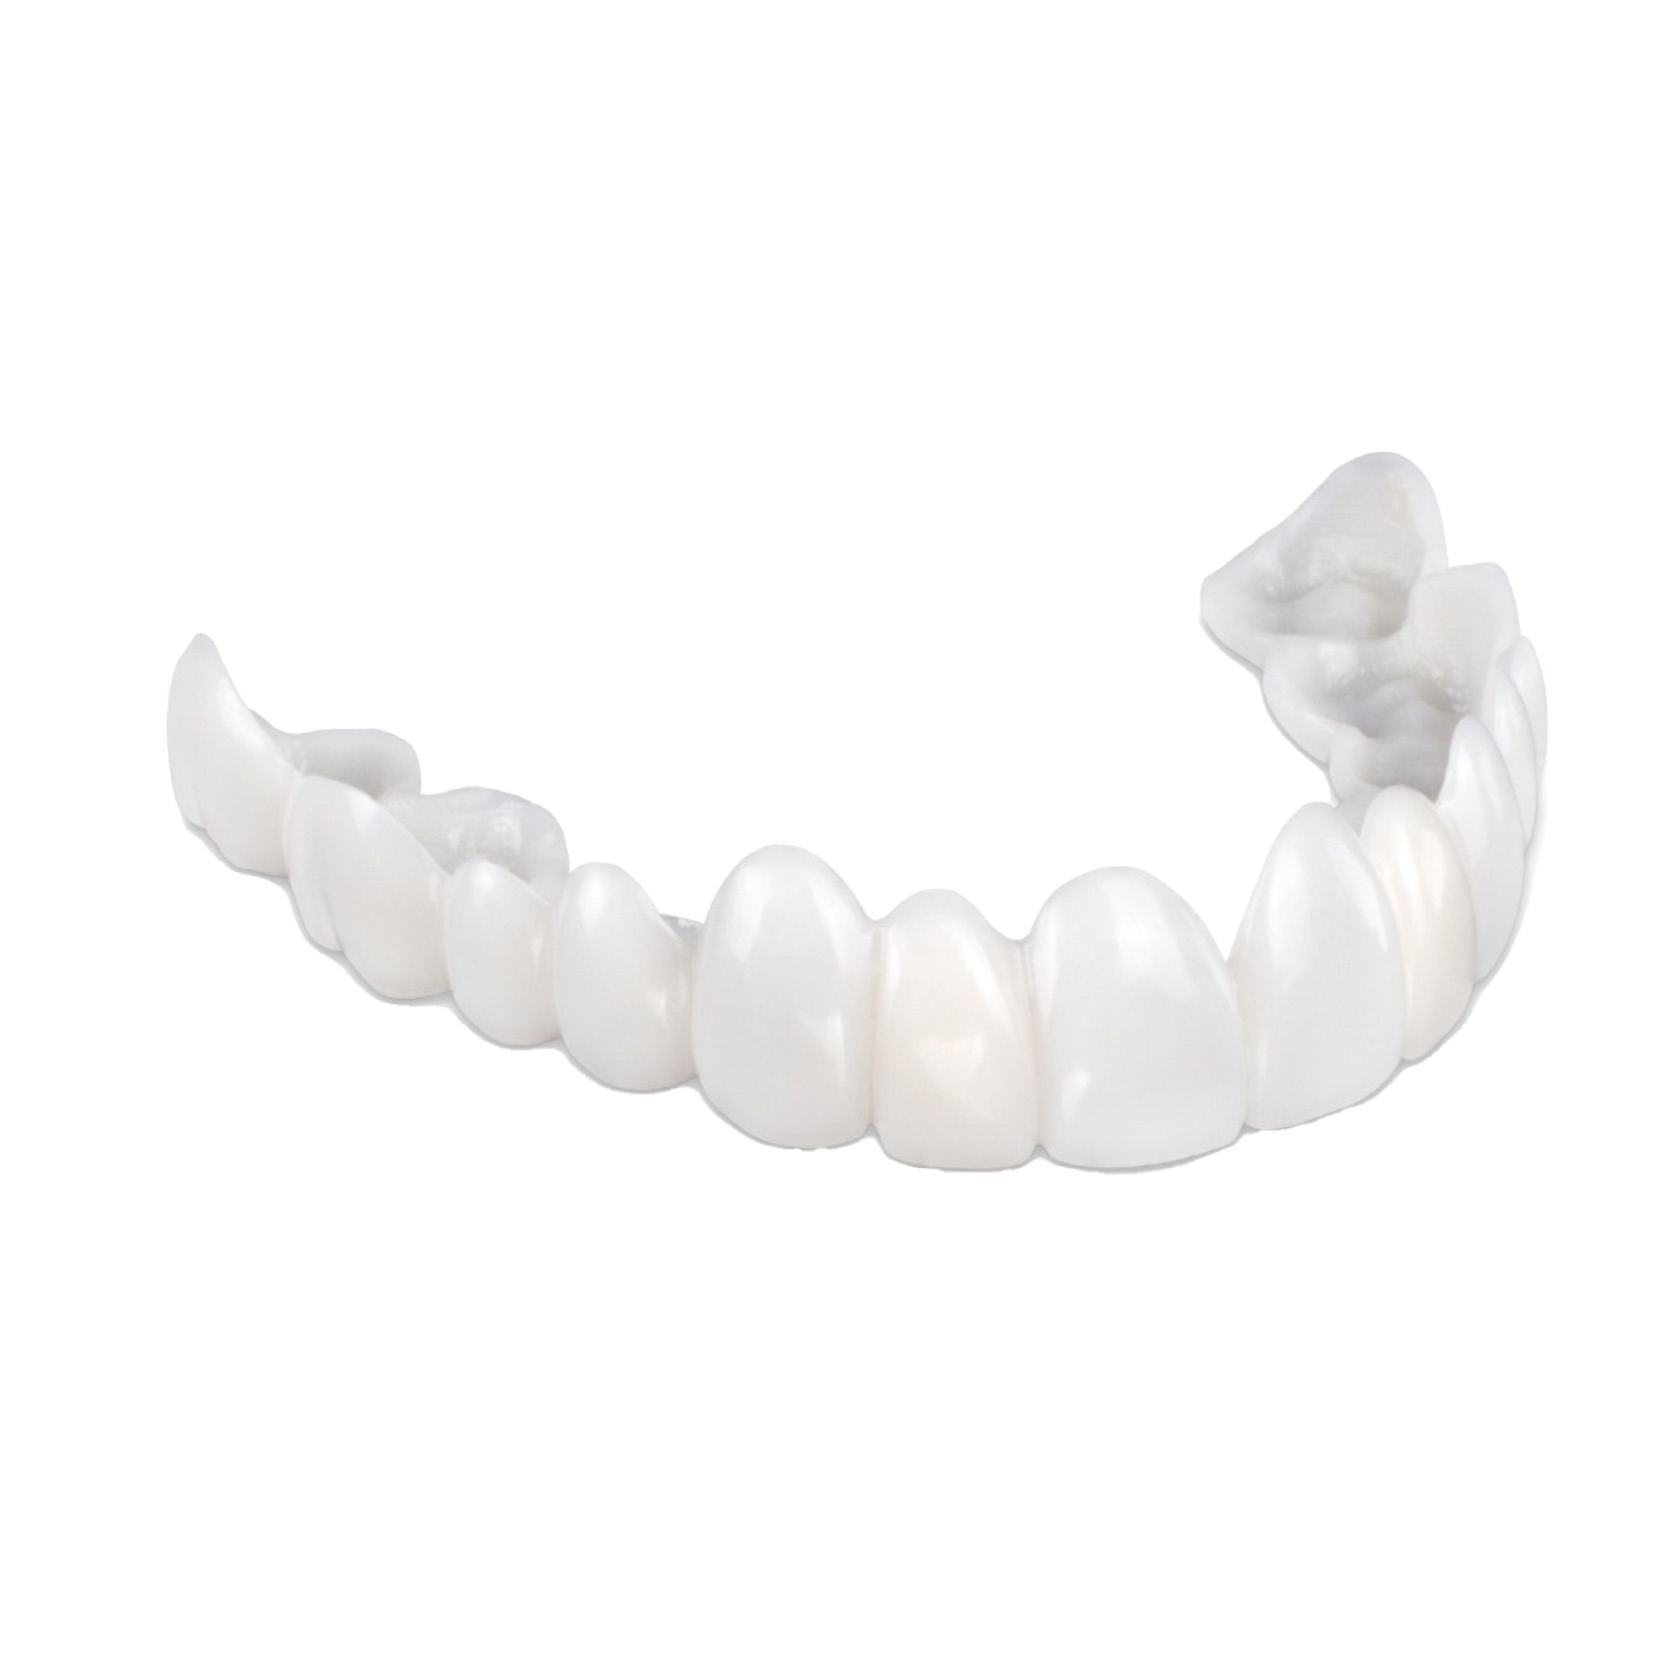 High-quality best whitening trays company-1